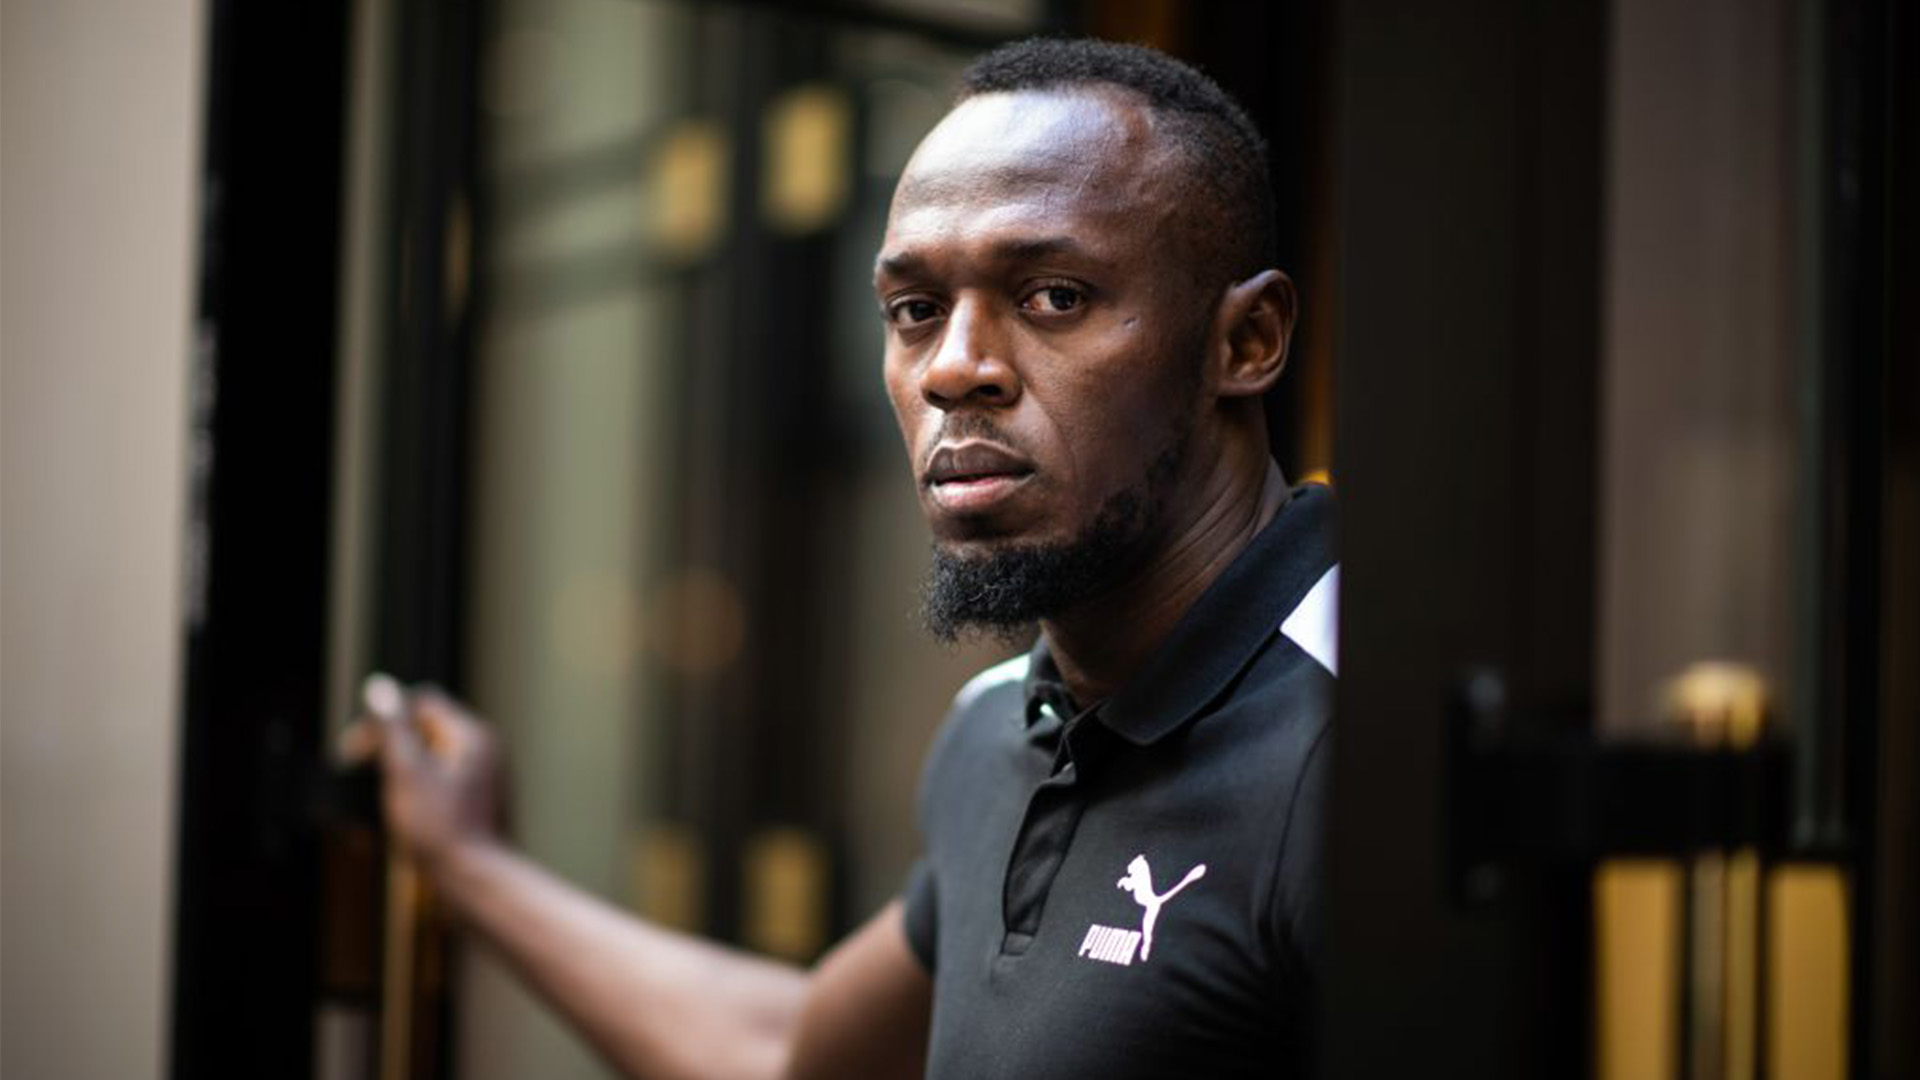 Usain Bolt Missing $12M From His Retirement Savings Account From Investment Firm, Attorney Says